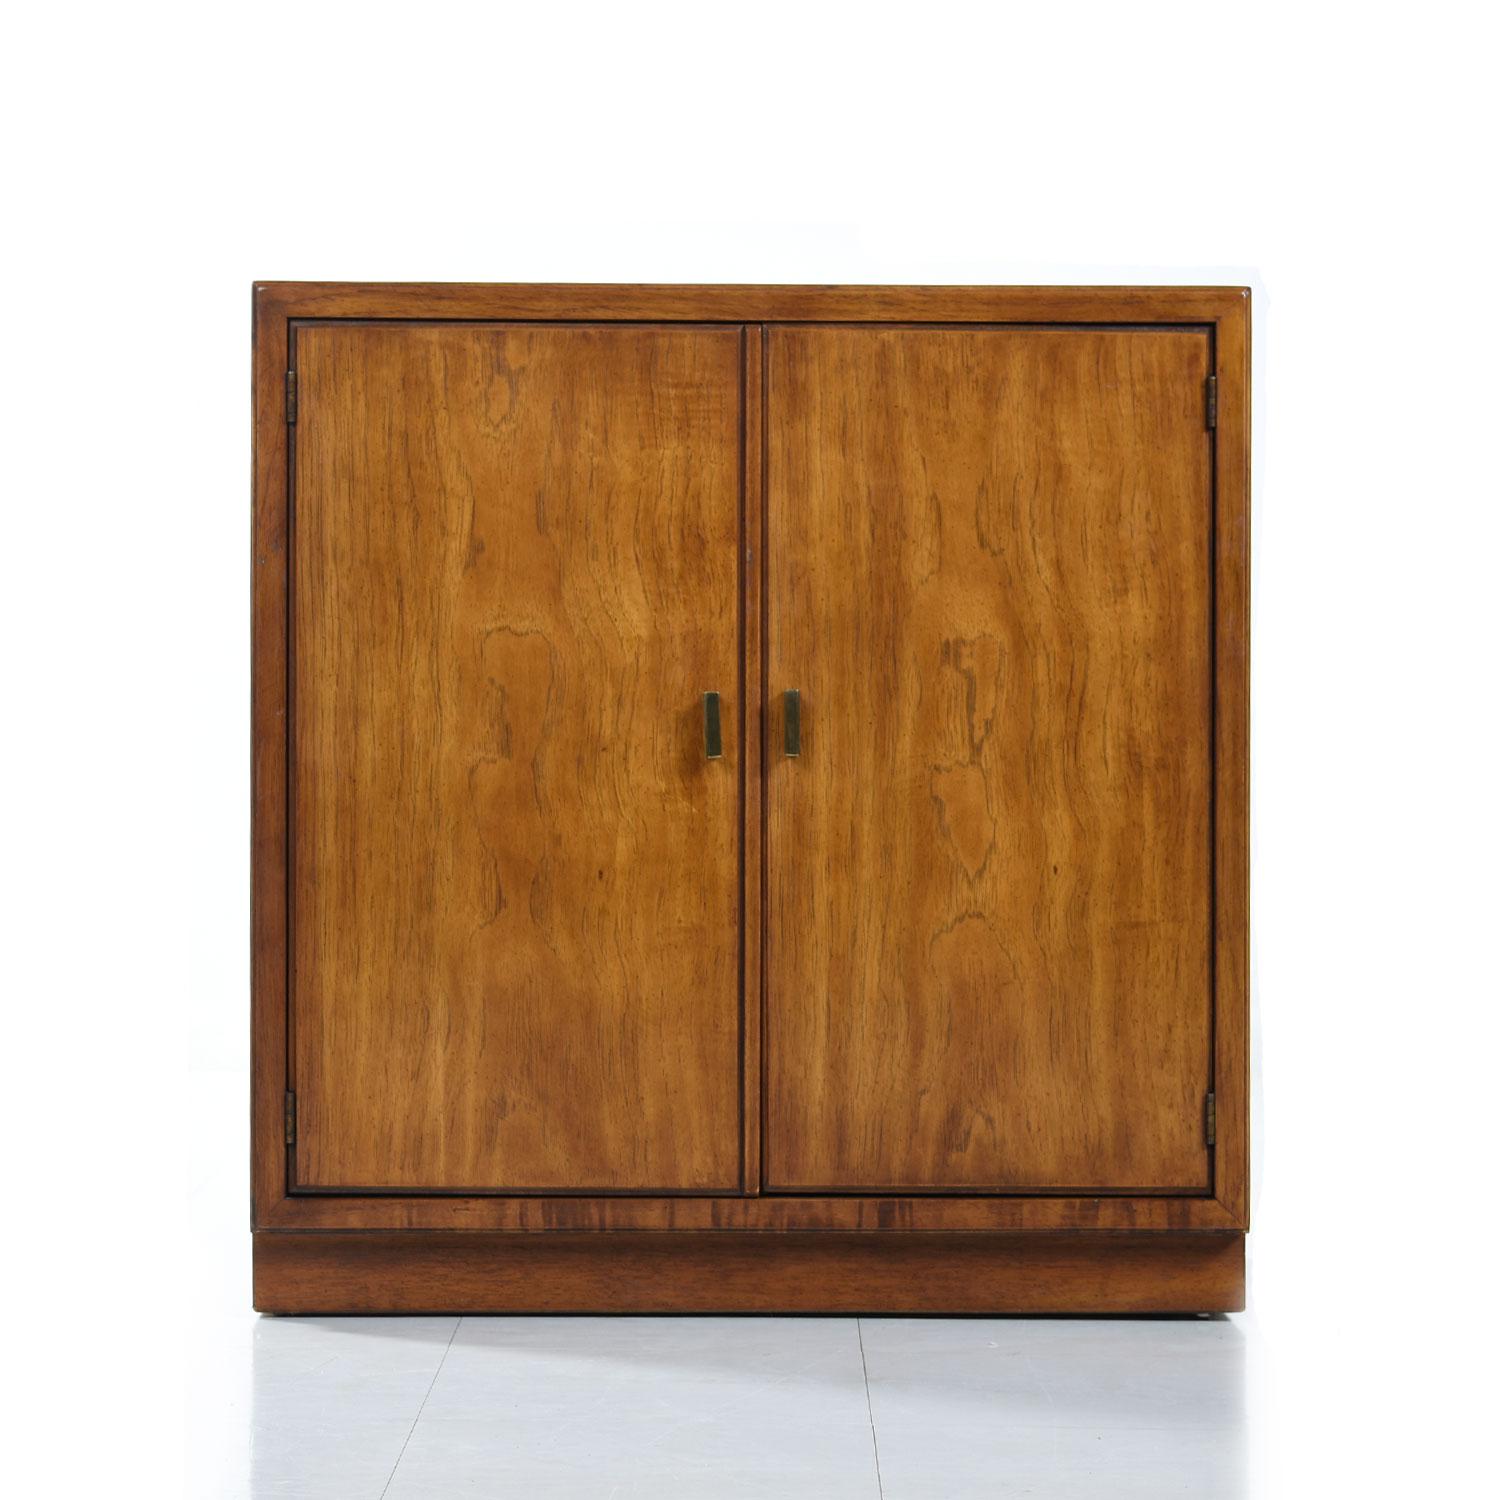 We have two cabinets available. Each sold independently. 

Old growth flared grain flaxen pecan inside and out. Super-sleek profile with practicality maximized throughout. If you are in a condo, small home or office this multifunctional piece is